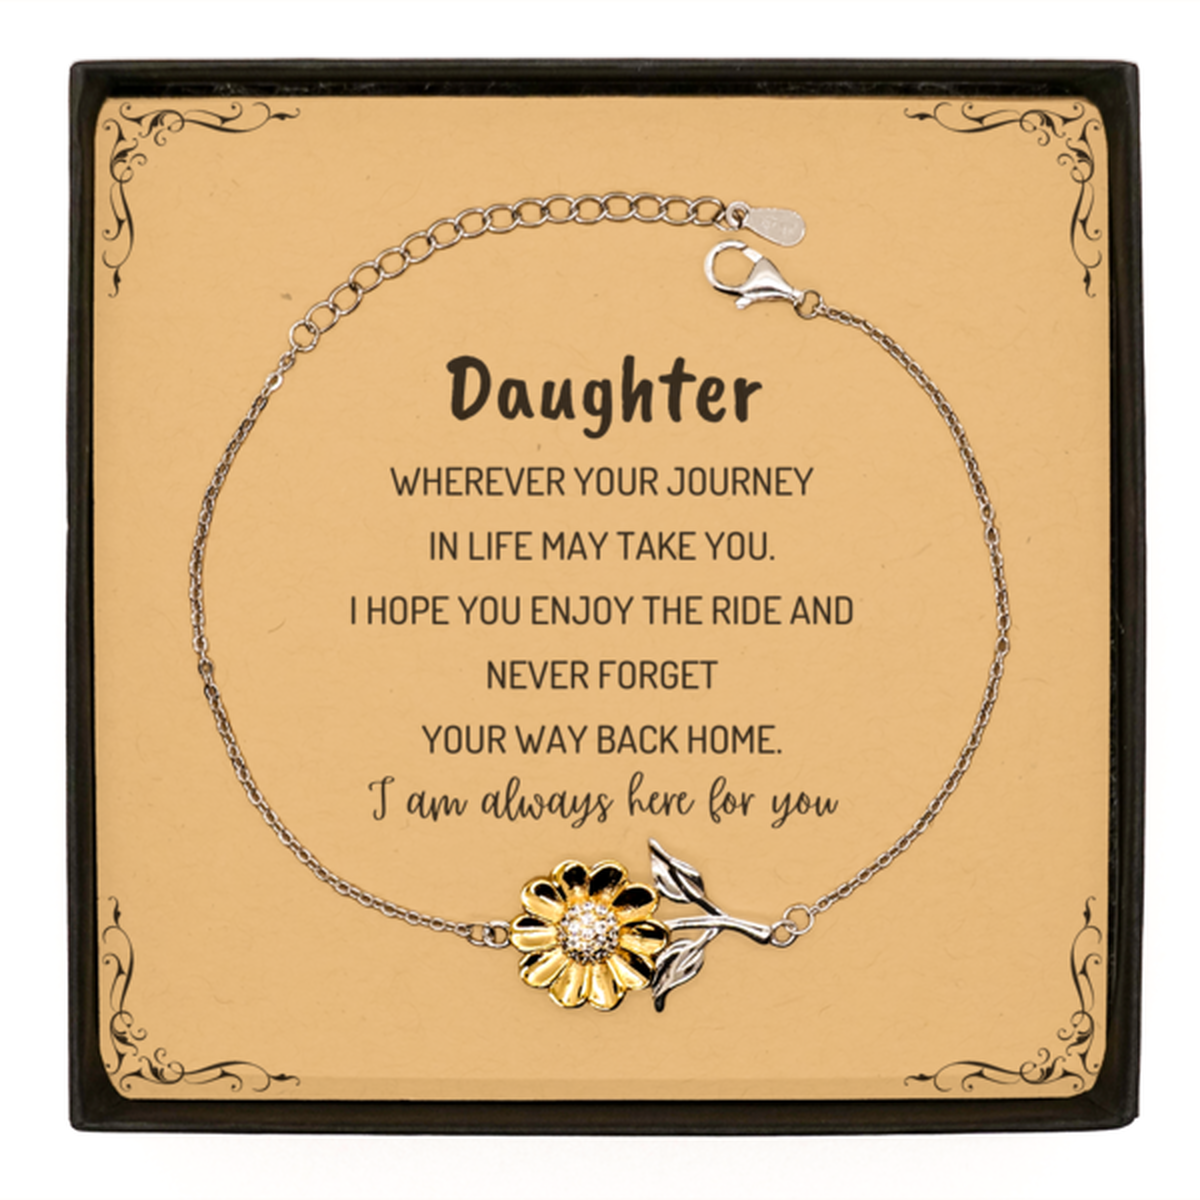 Daughter wherever your journey in life may take you, I am always here for you Daughter Sunflower Bracelet, Awesome Christmas Gifts For Daughter Message Card, Daughter Birthday Gifts for Men Women Family Loved One